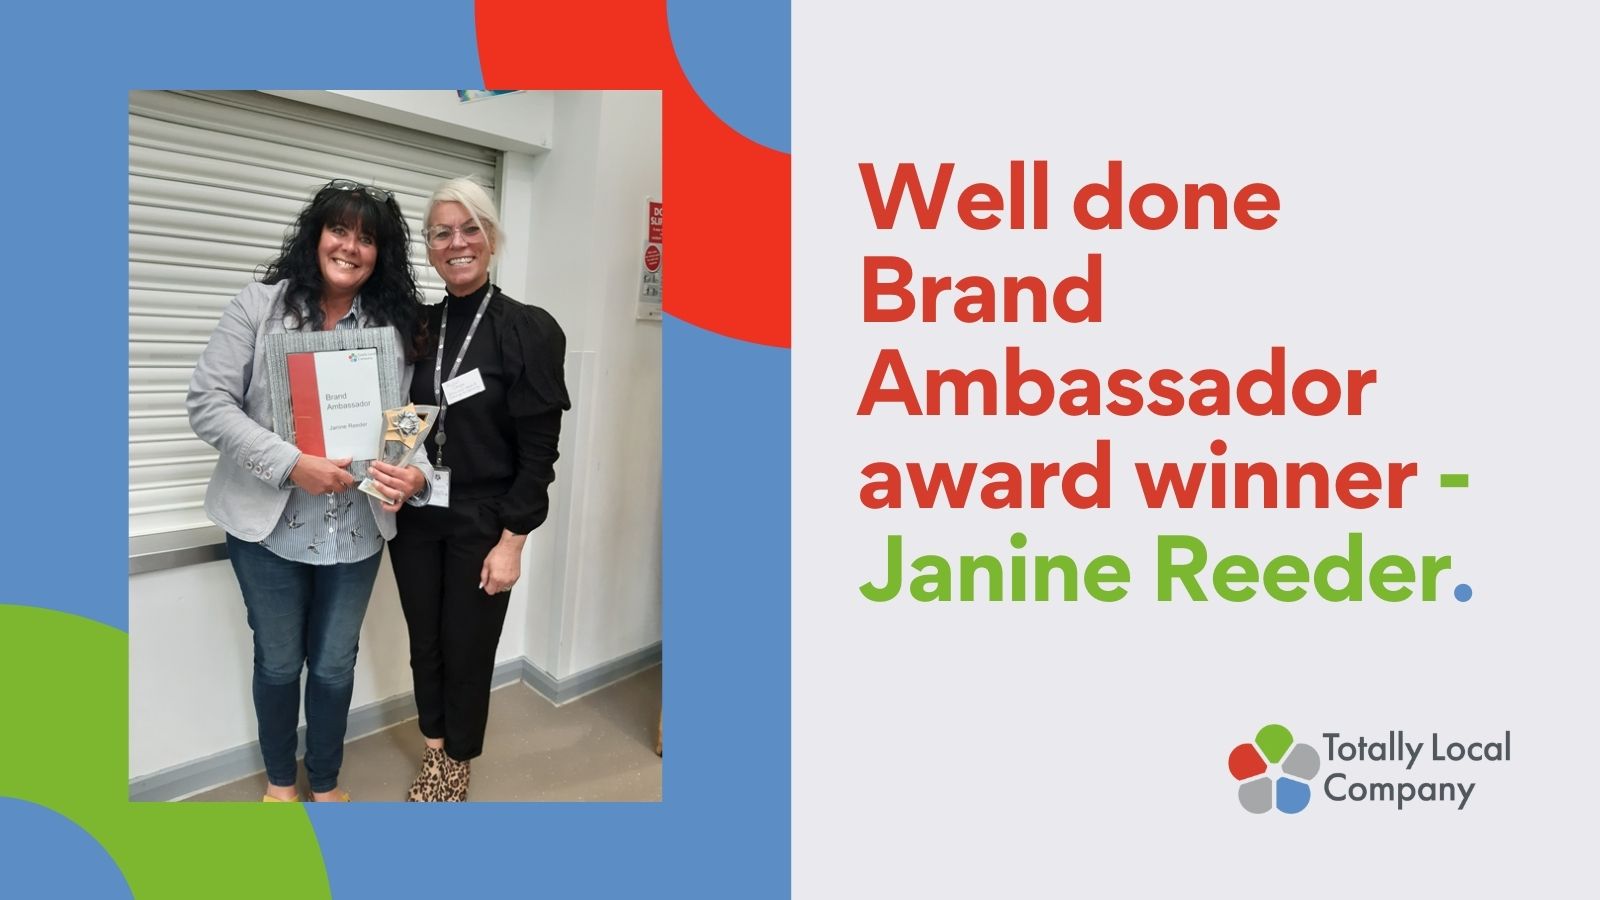 wording - well done brand ambassador Janine Reeder, image of Janine with her senior manager, holding her award and certificate